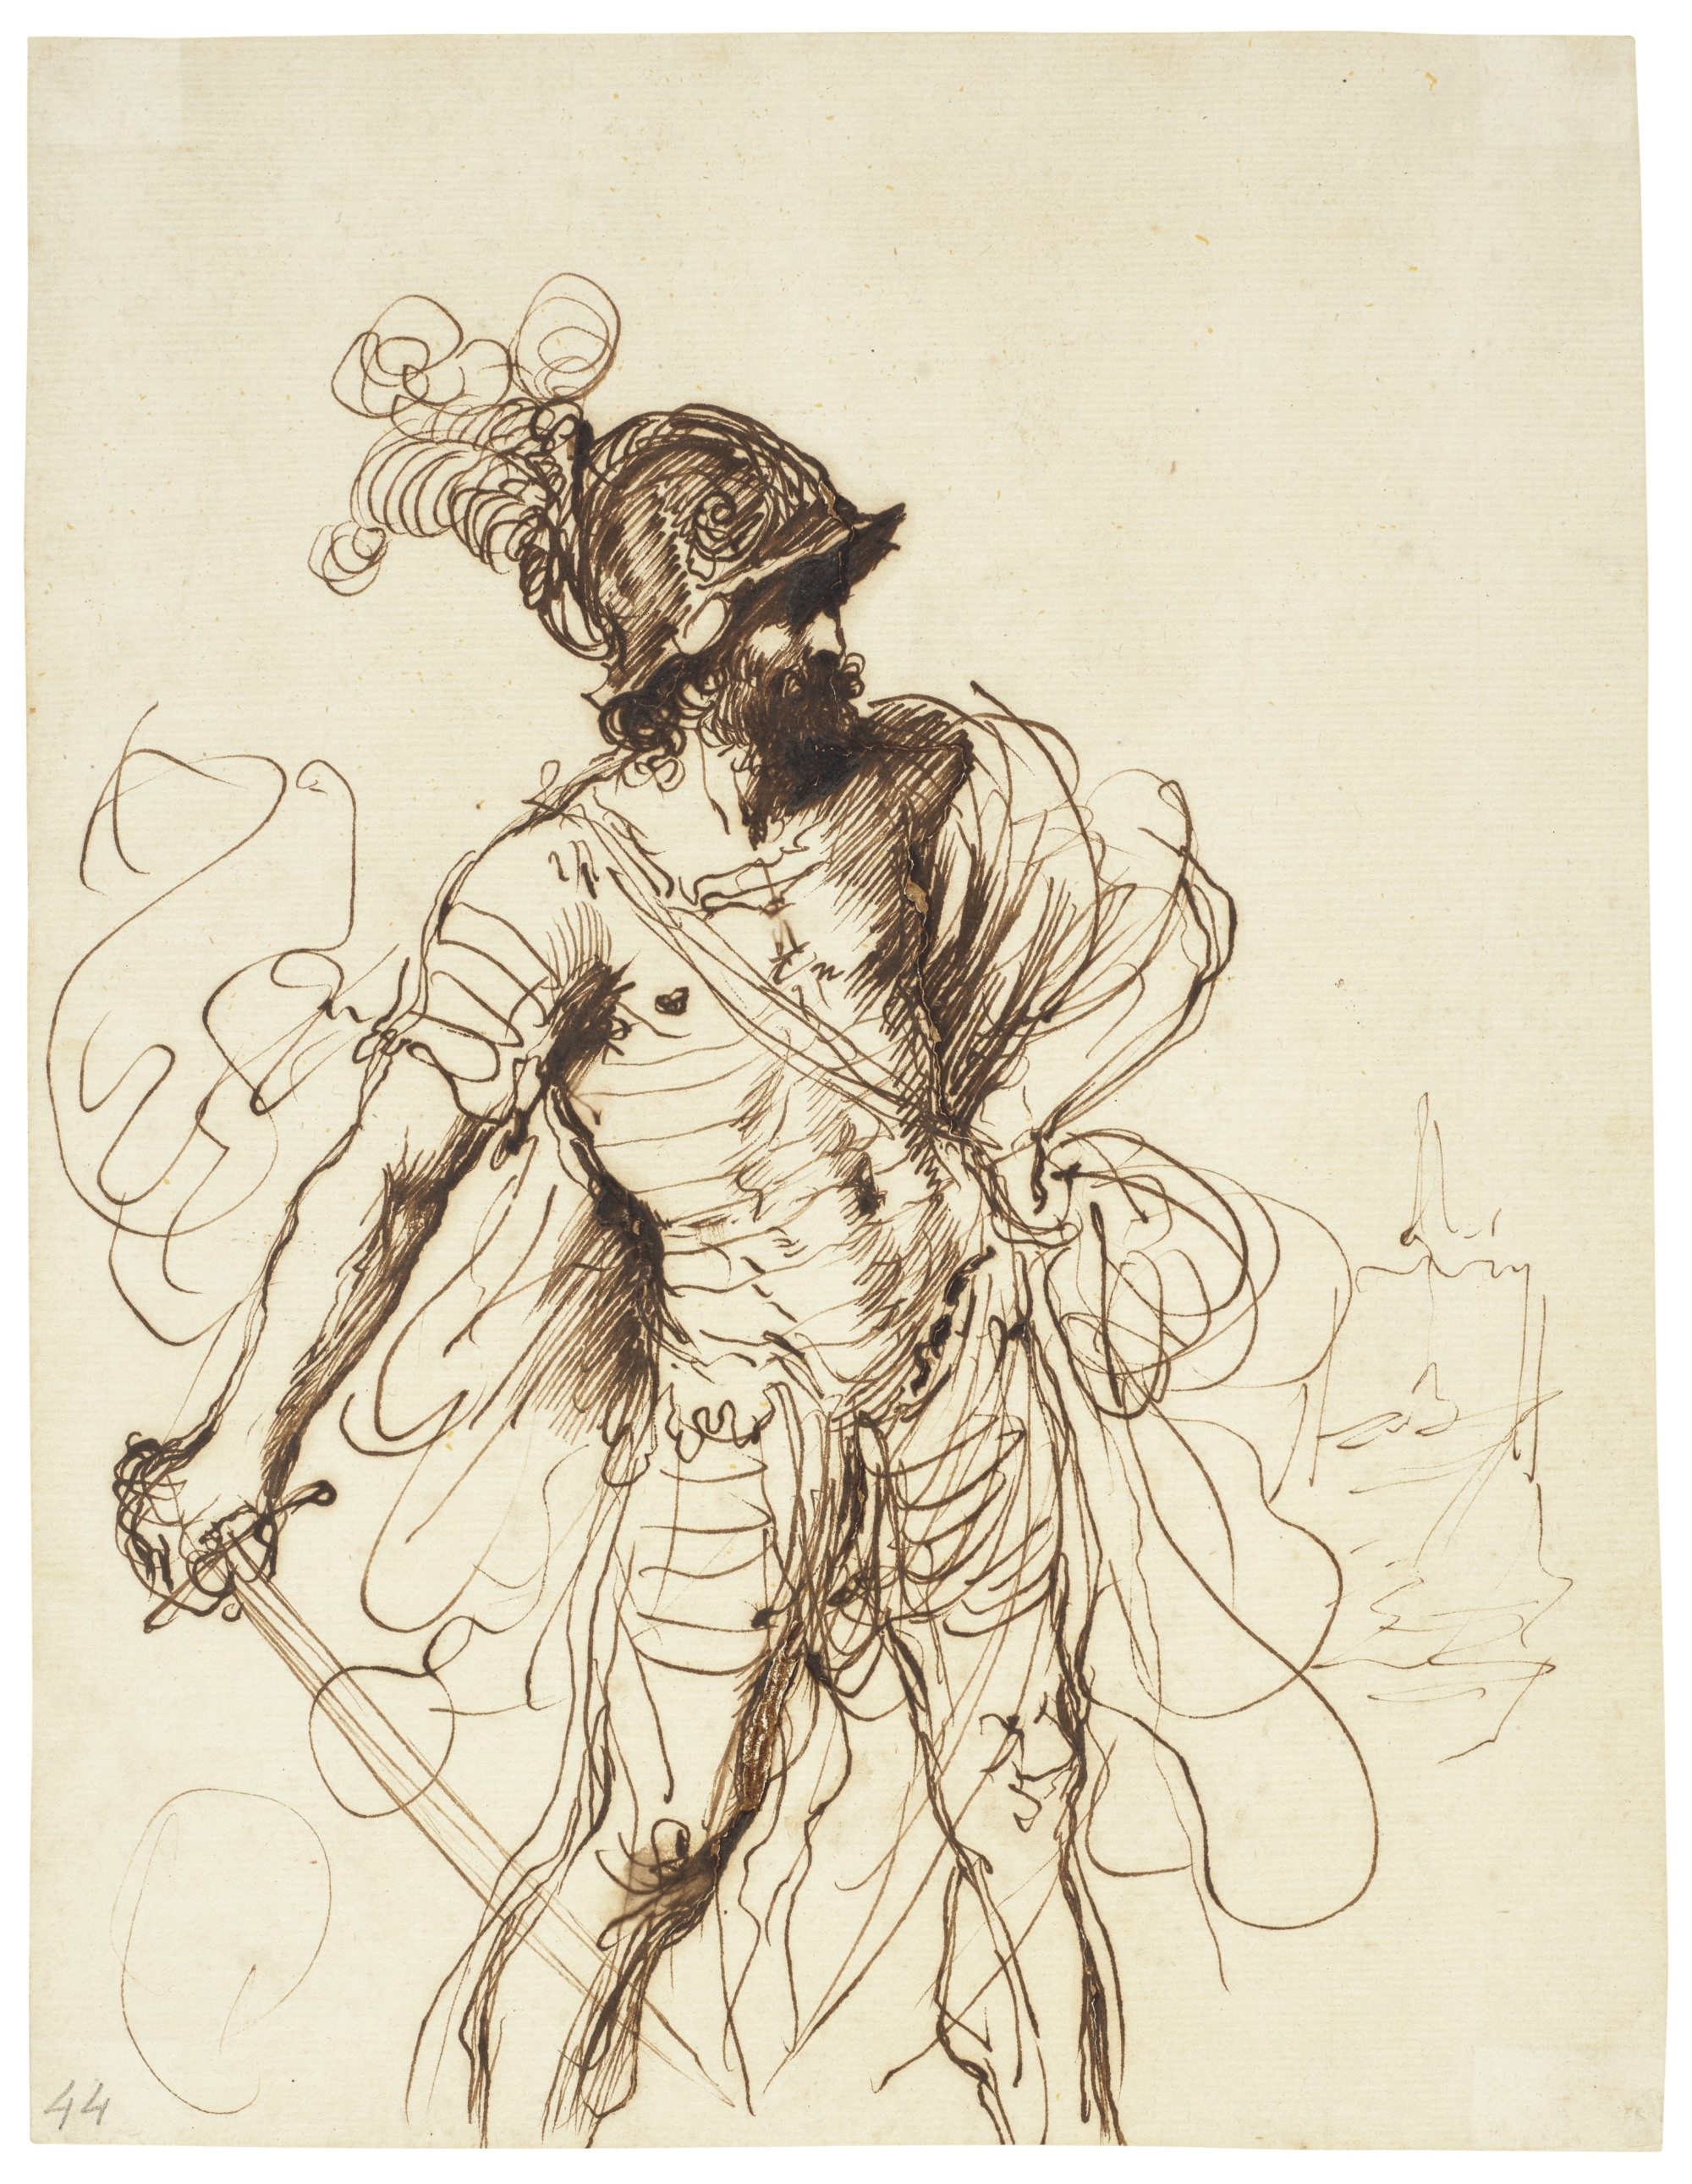 Christie's Announces the Old Master and British Drawings Online Sale